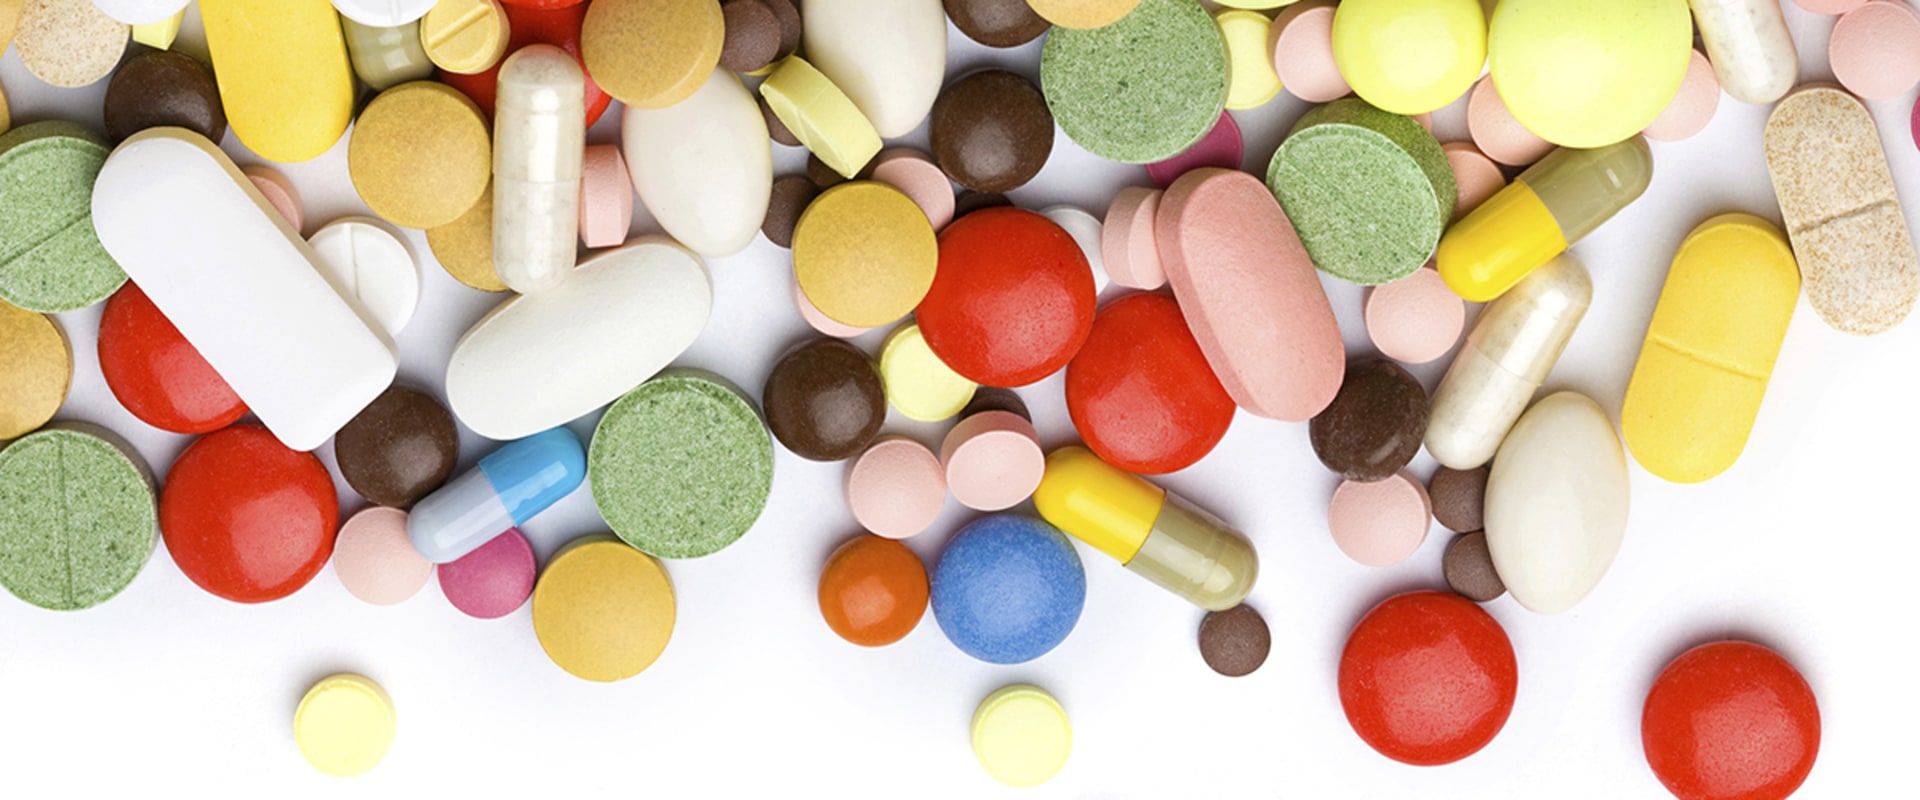 Organic vs Non-Organic Vitamin Supplements: What's the Best Choice?